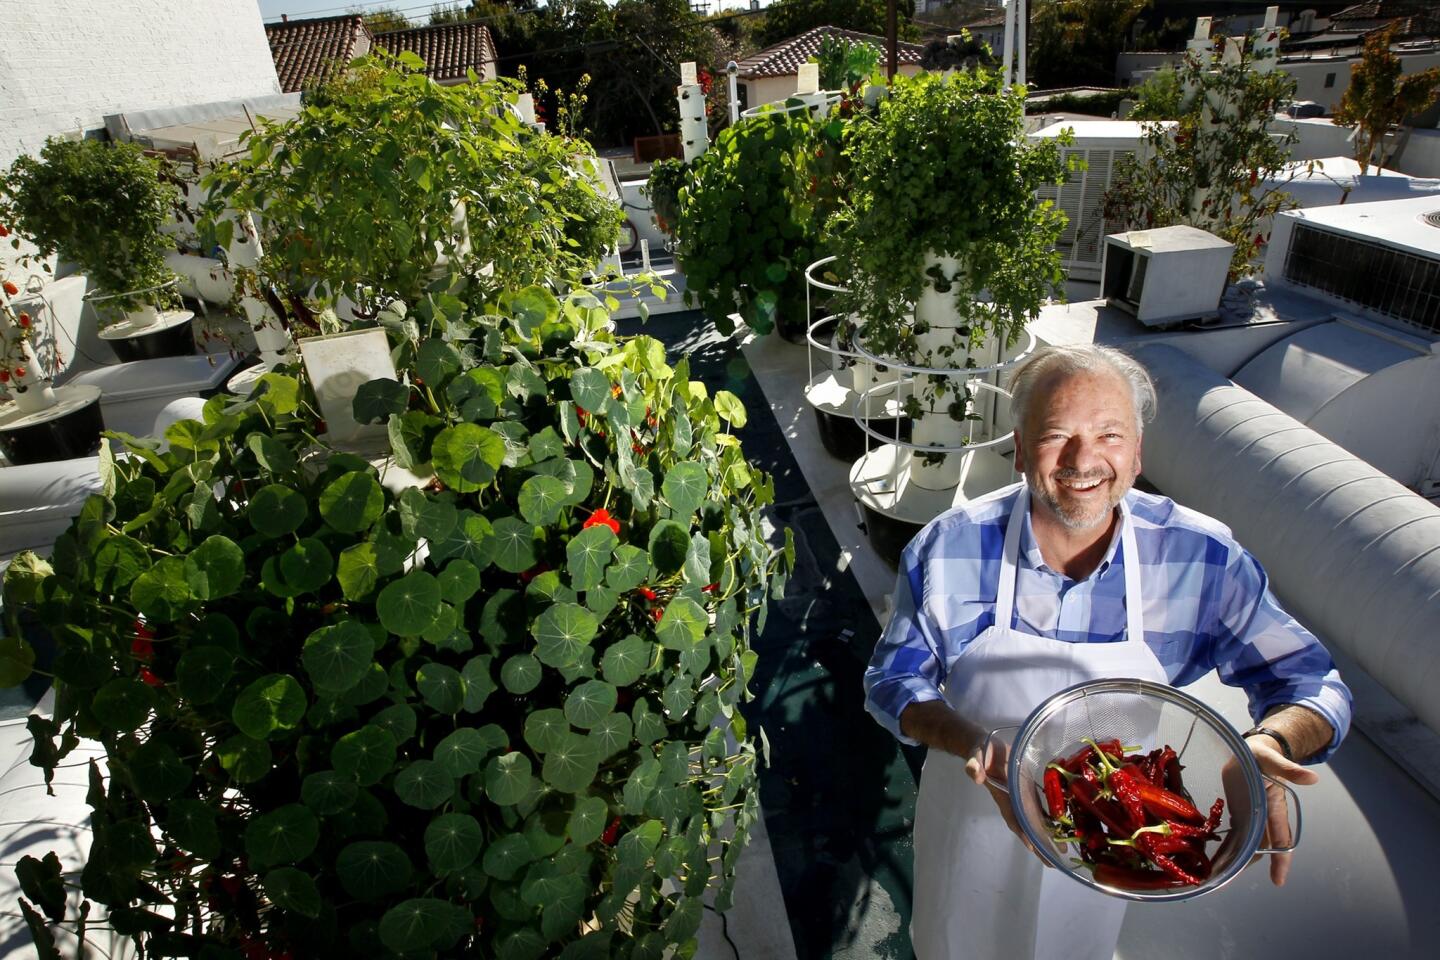 Rivera chef John Sedlar holds a bowl of chiles harvested from Cielo Verde, his rooftop garden above Beverly Boulevard in midtown Los Angeles.